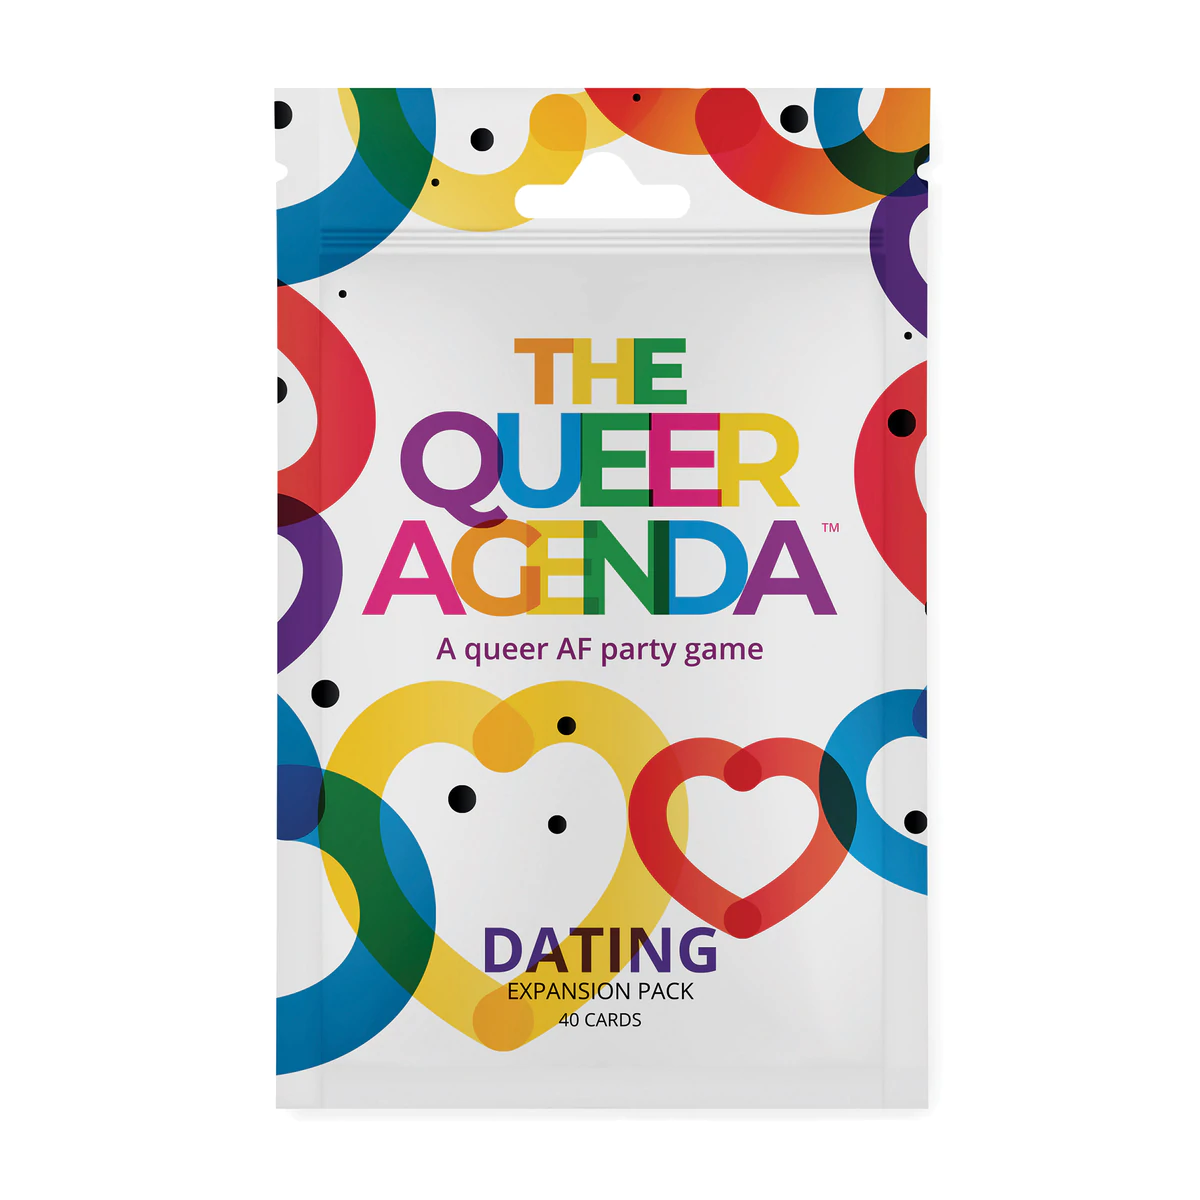 THE QUEER AGENDA DATING PACK